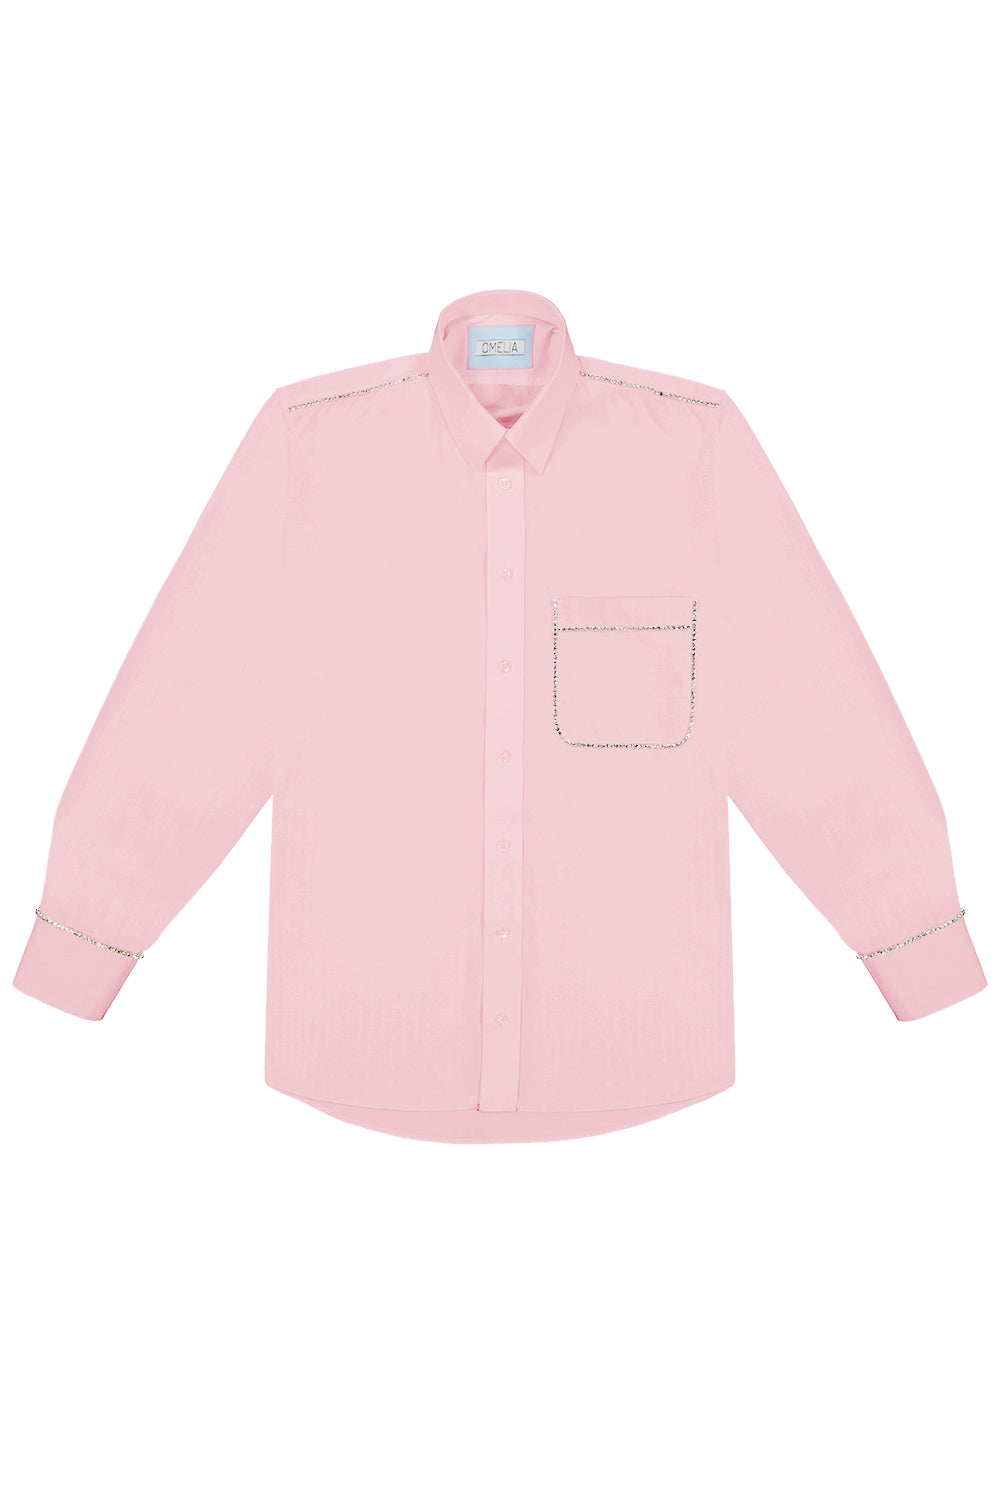 REDESIGNED  PINK SHIRT EBROIDERED POCKETS 10